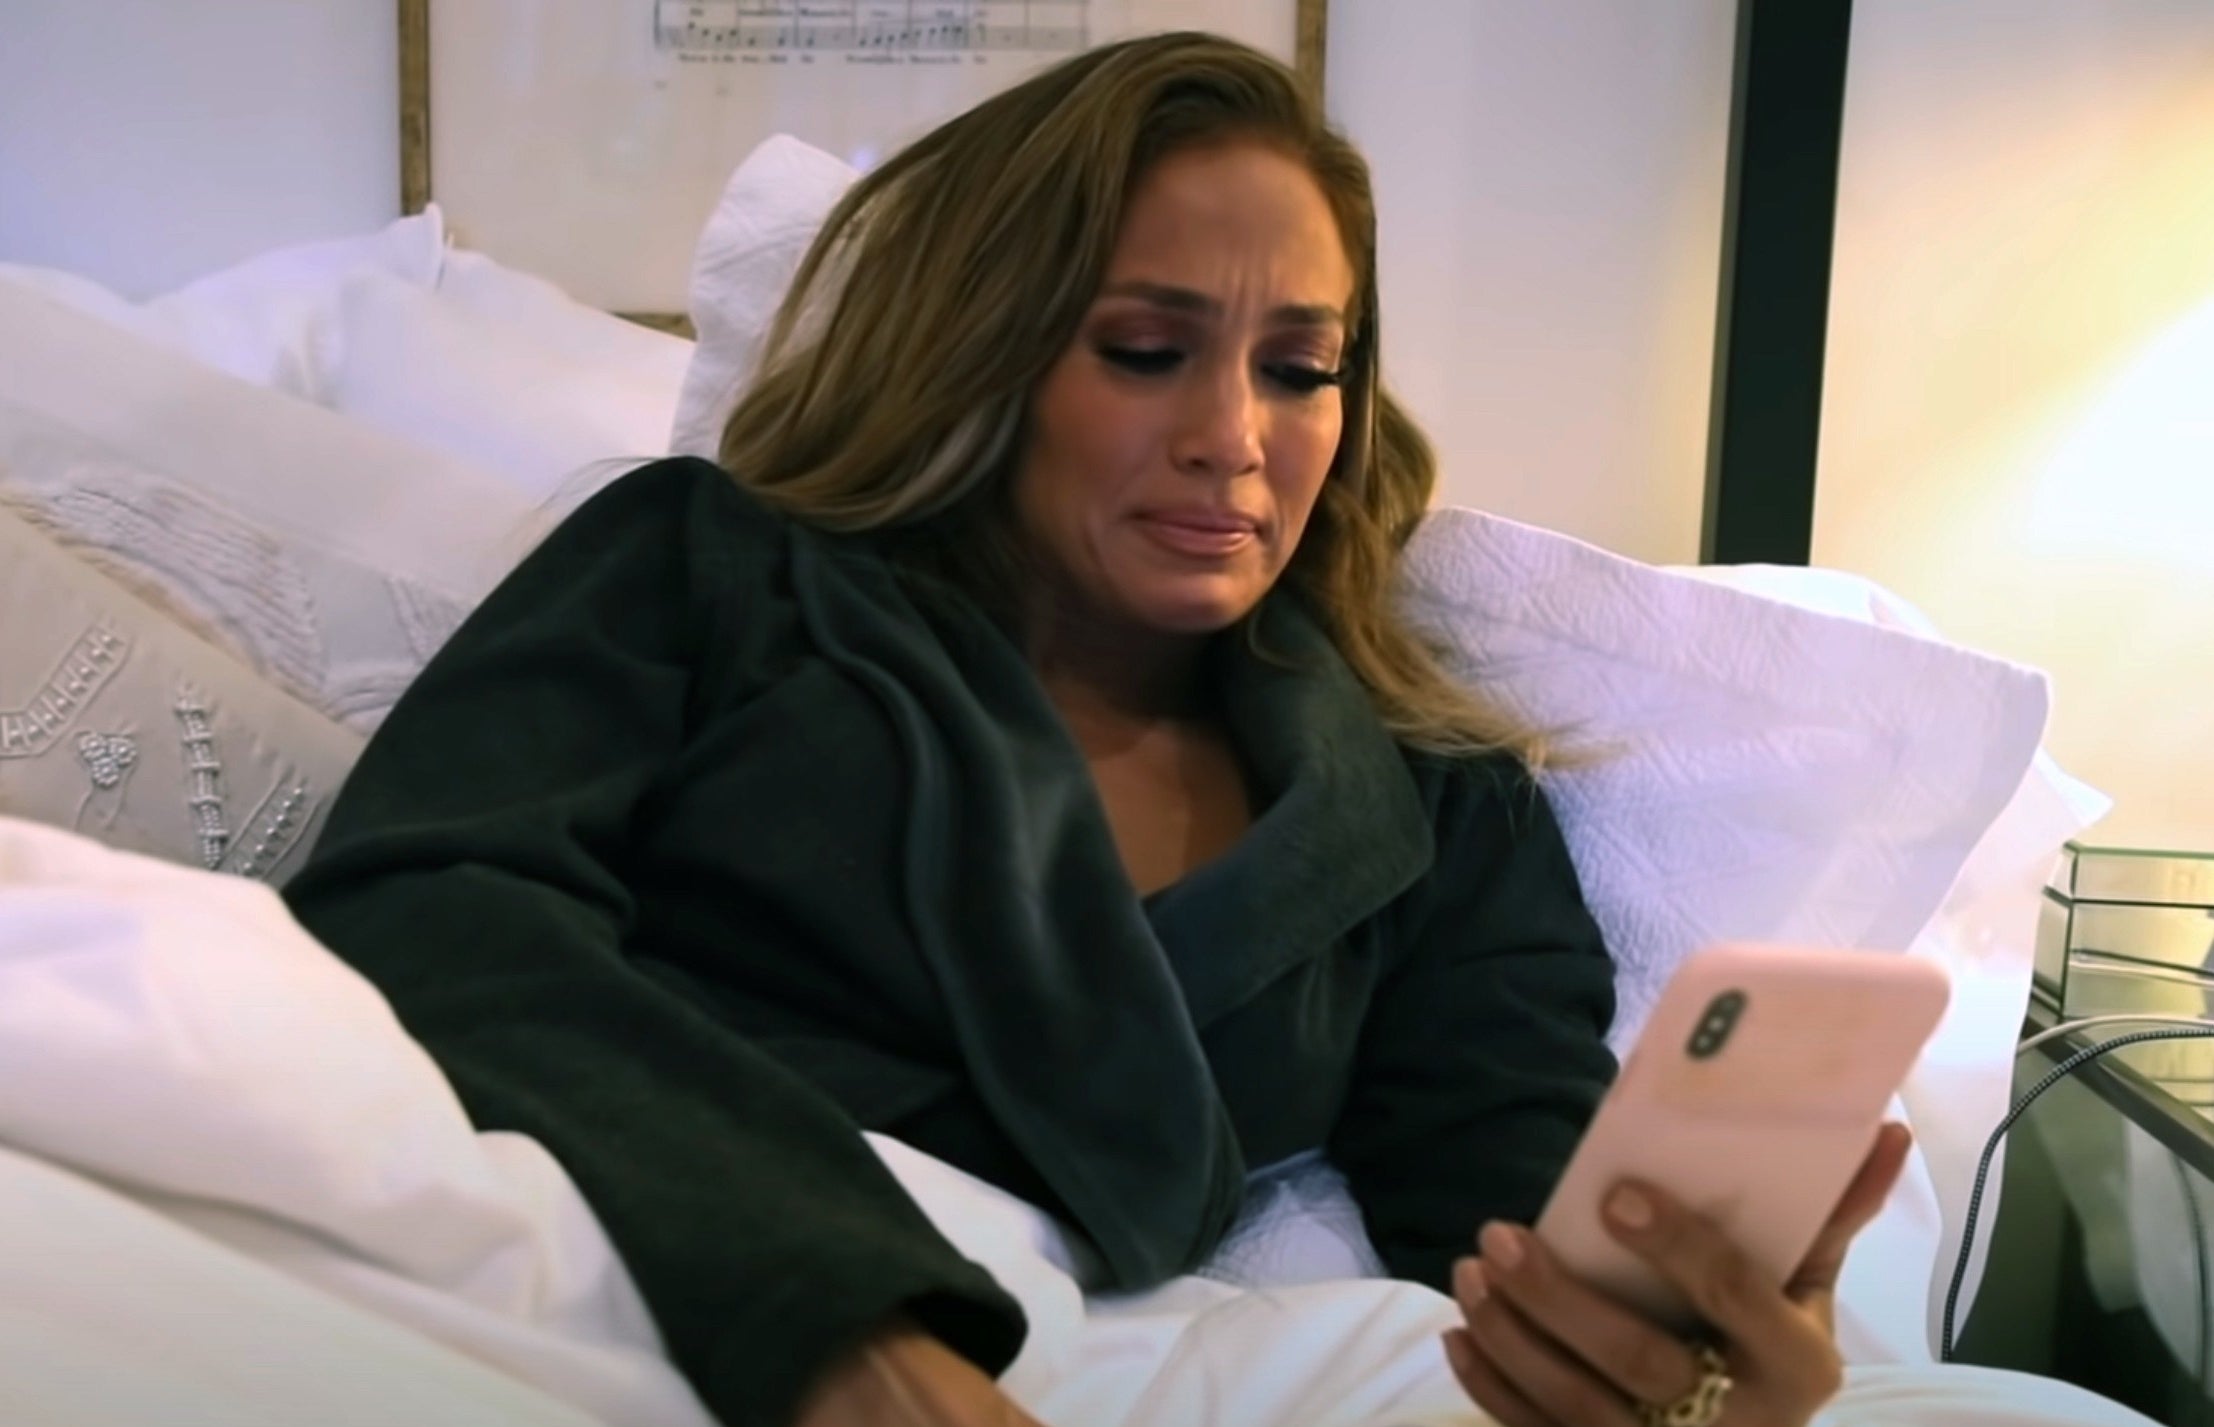 Jennifer looks upset while looking at her phone in bed